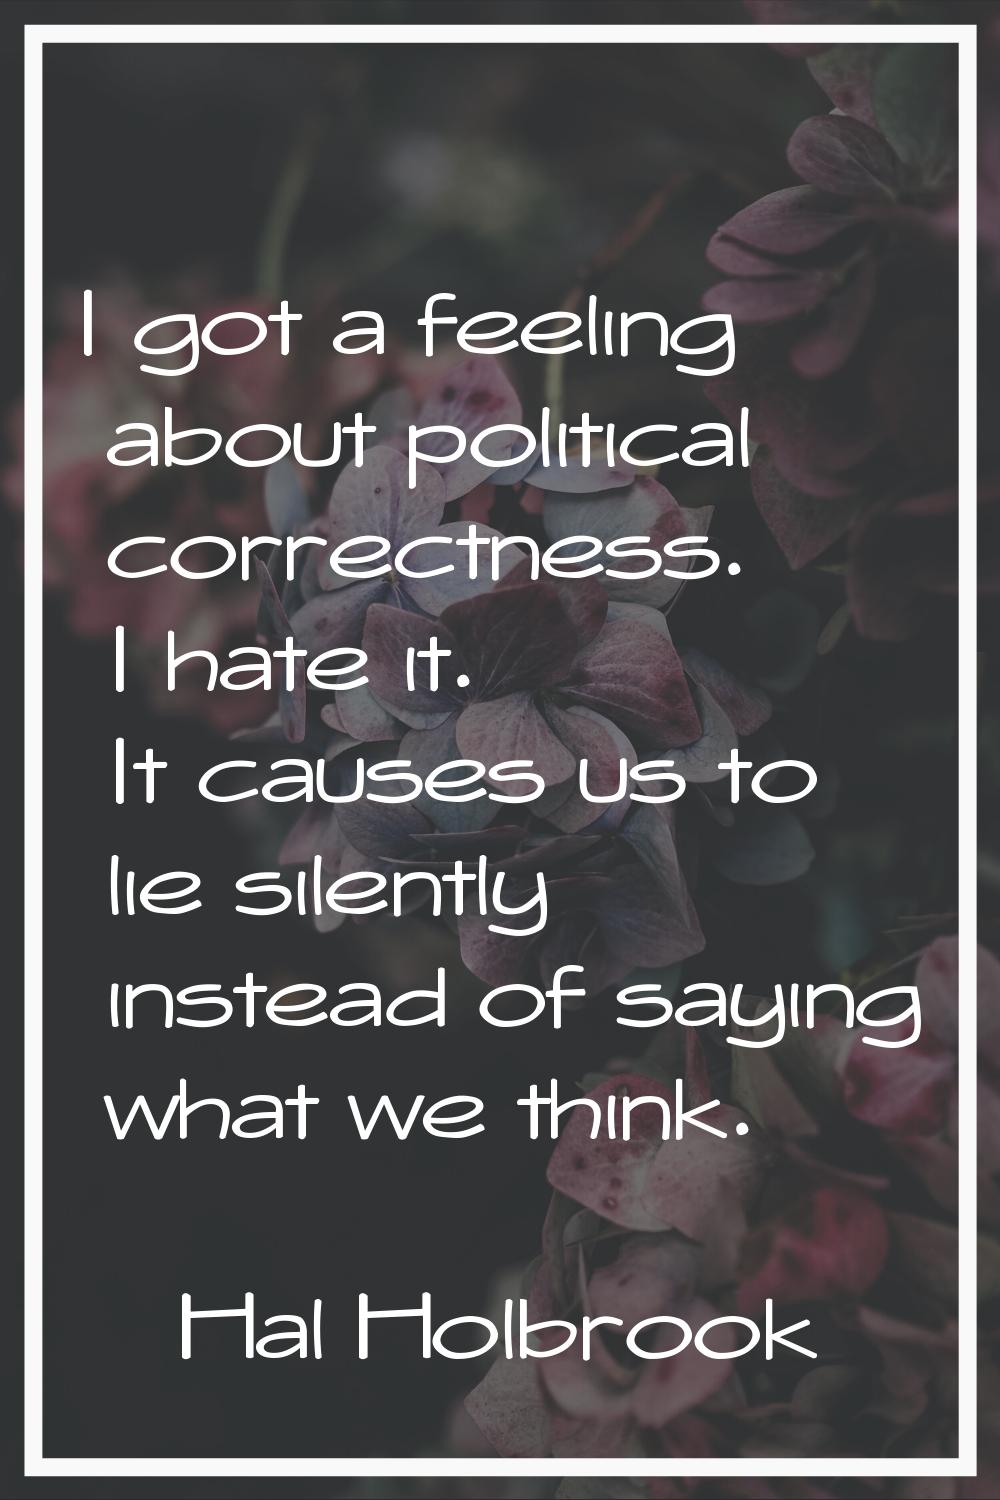 I got a feeling about political correctness. I hate it. It causes us to lie silently instead of say